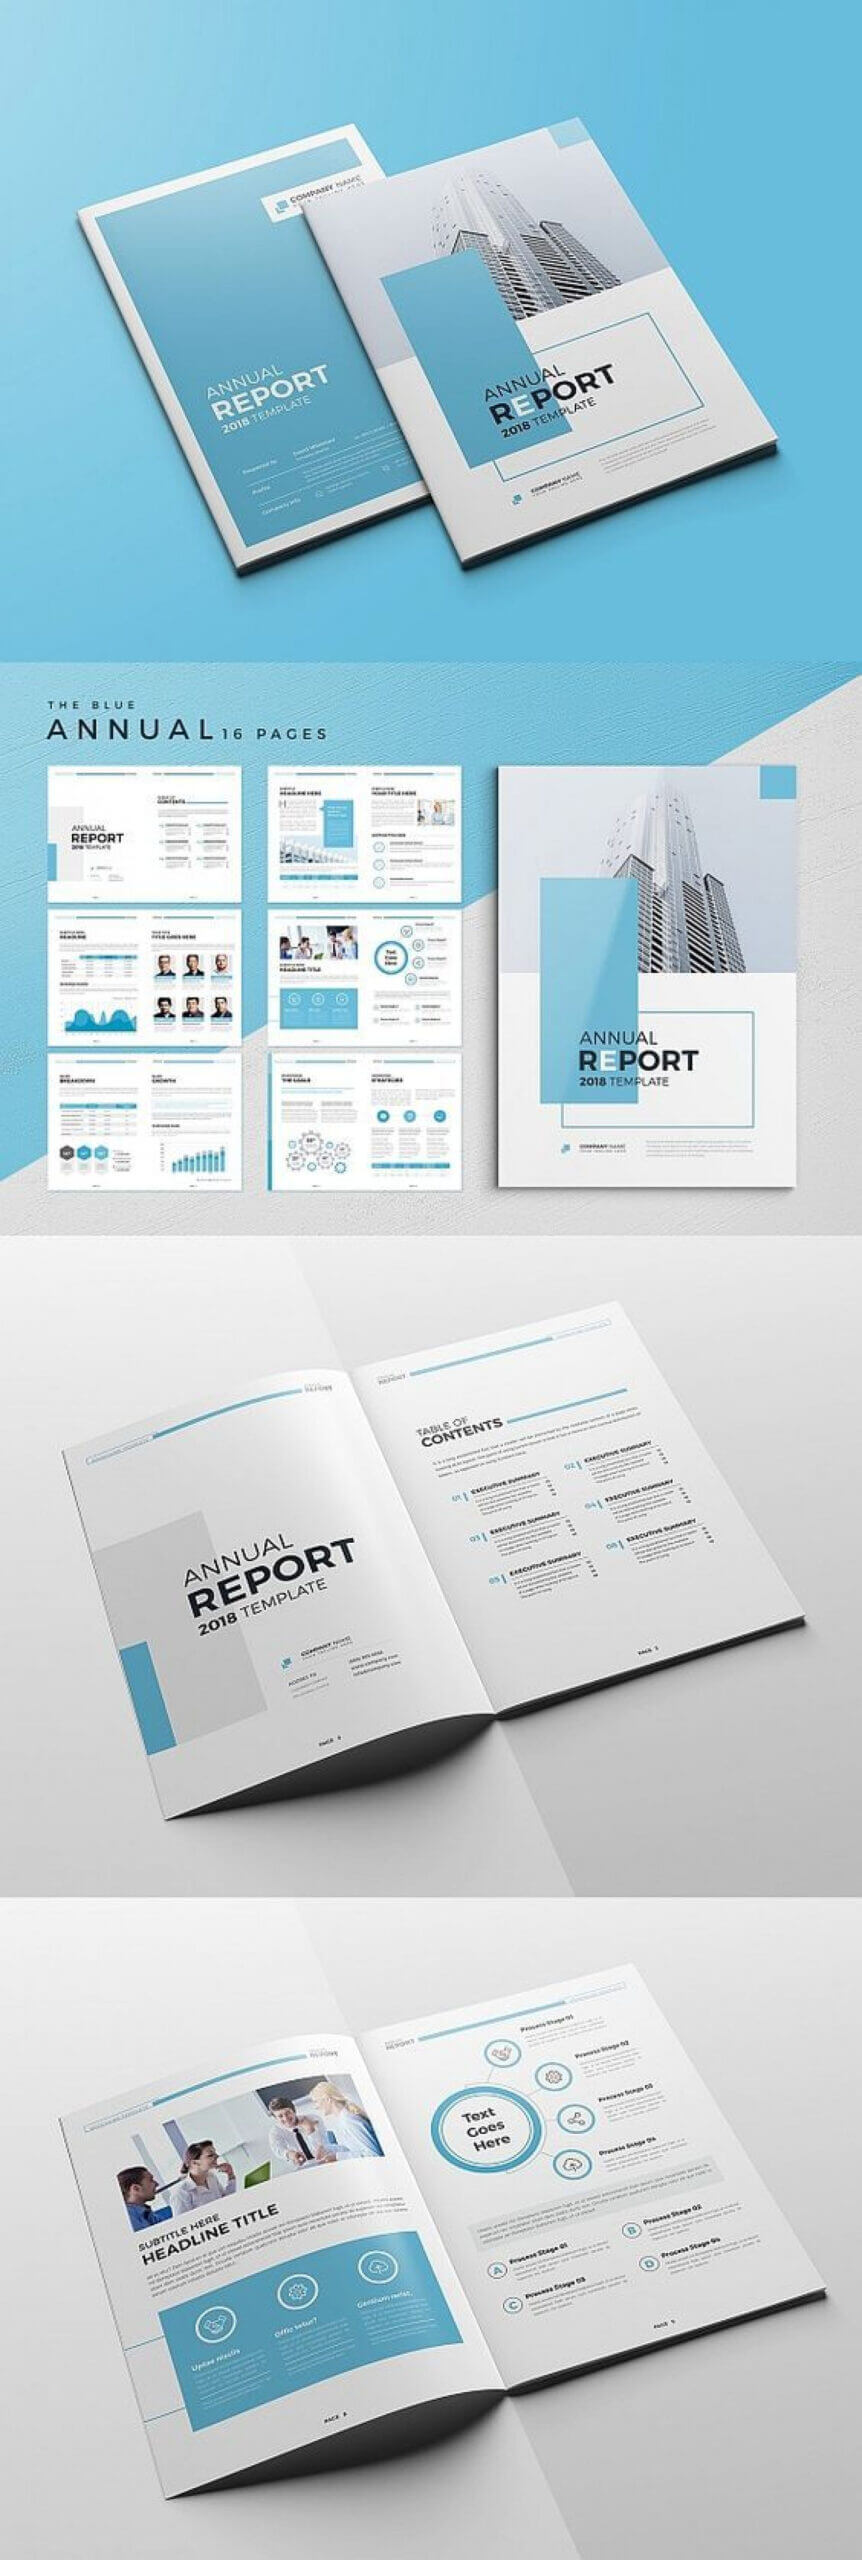 010 Creative Annual Report Template Word Marvelous Ideas Regarding Annual Report Template Word